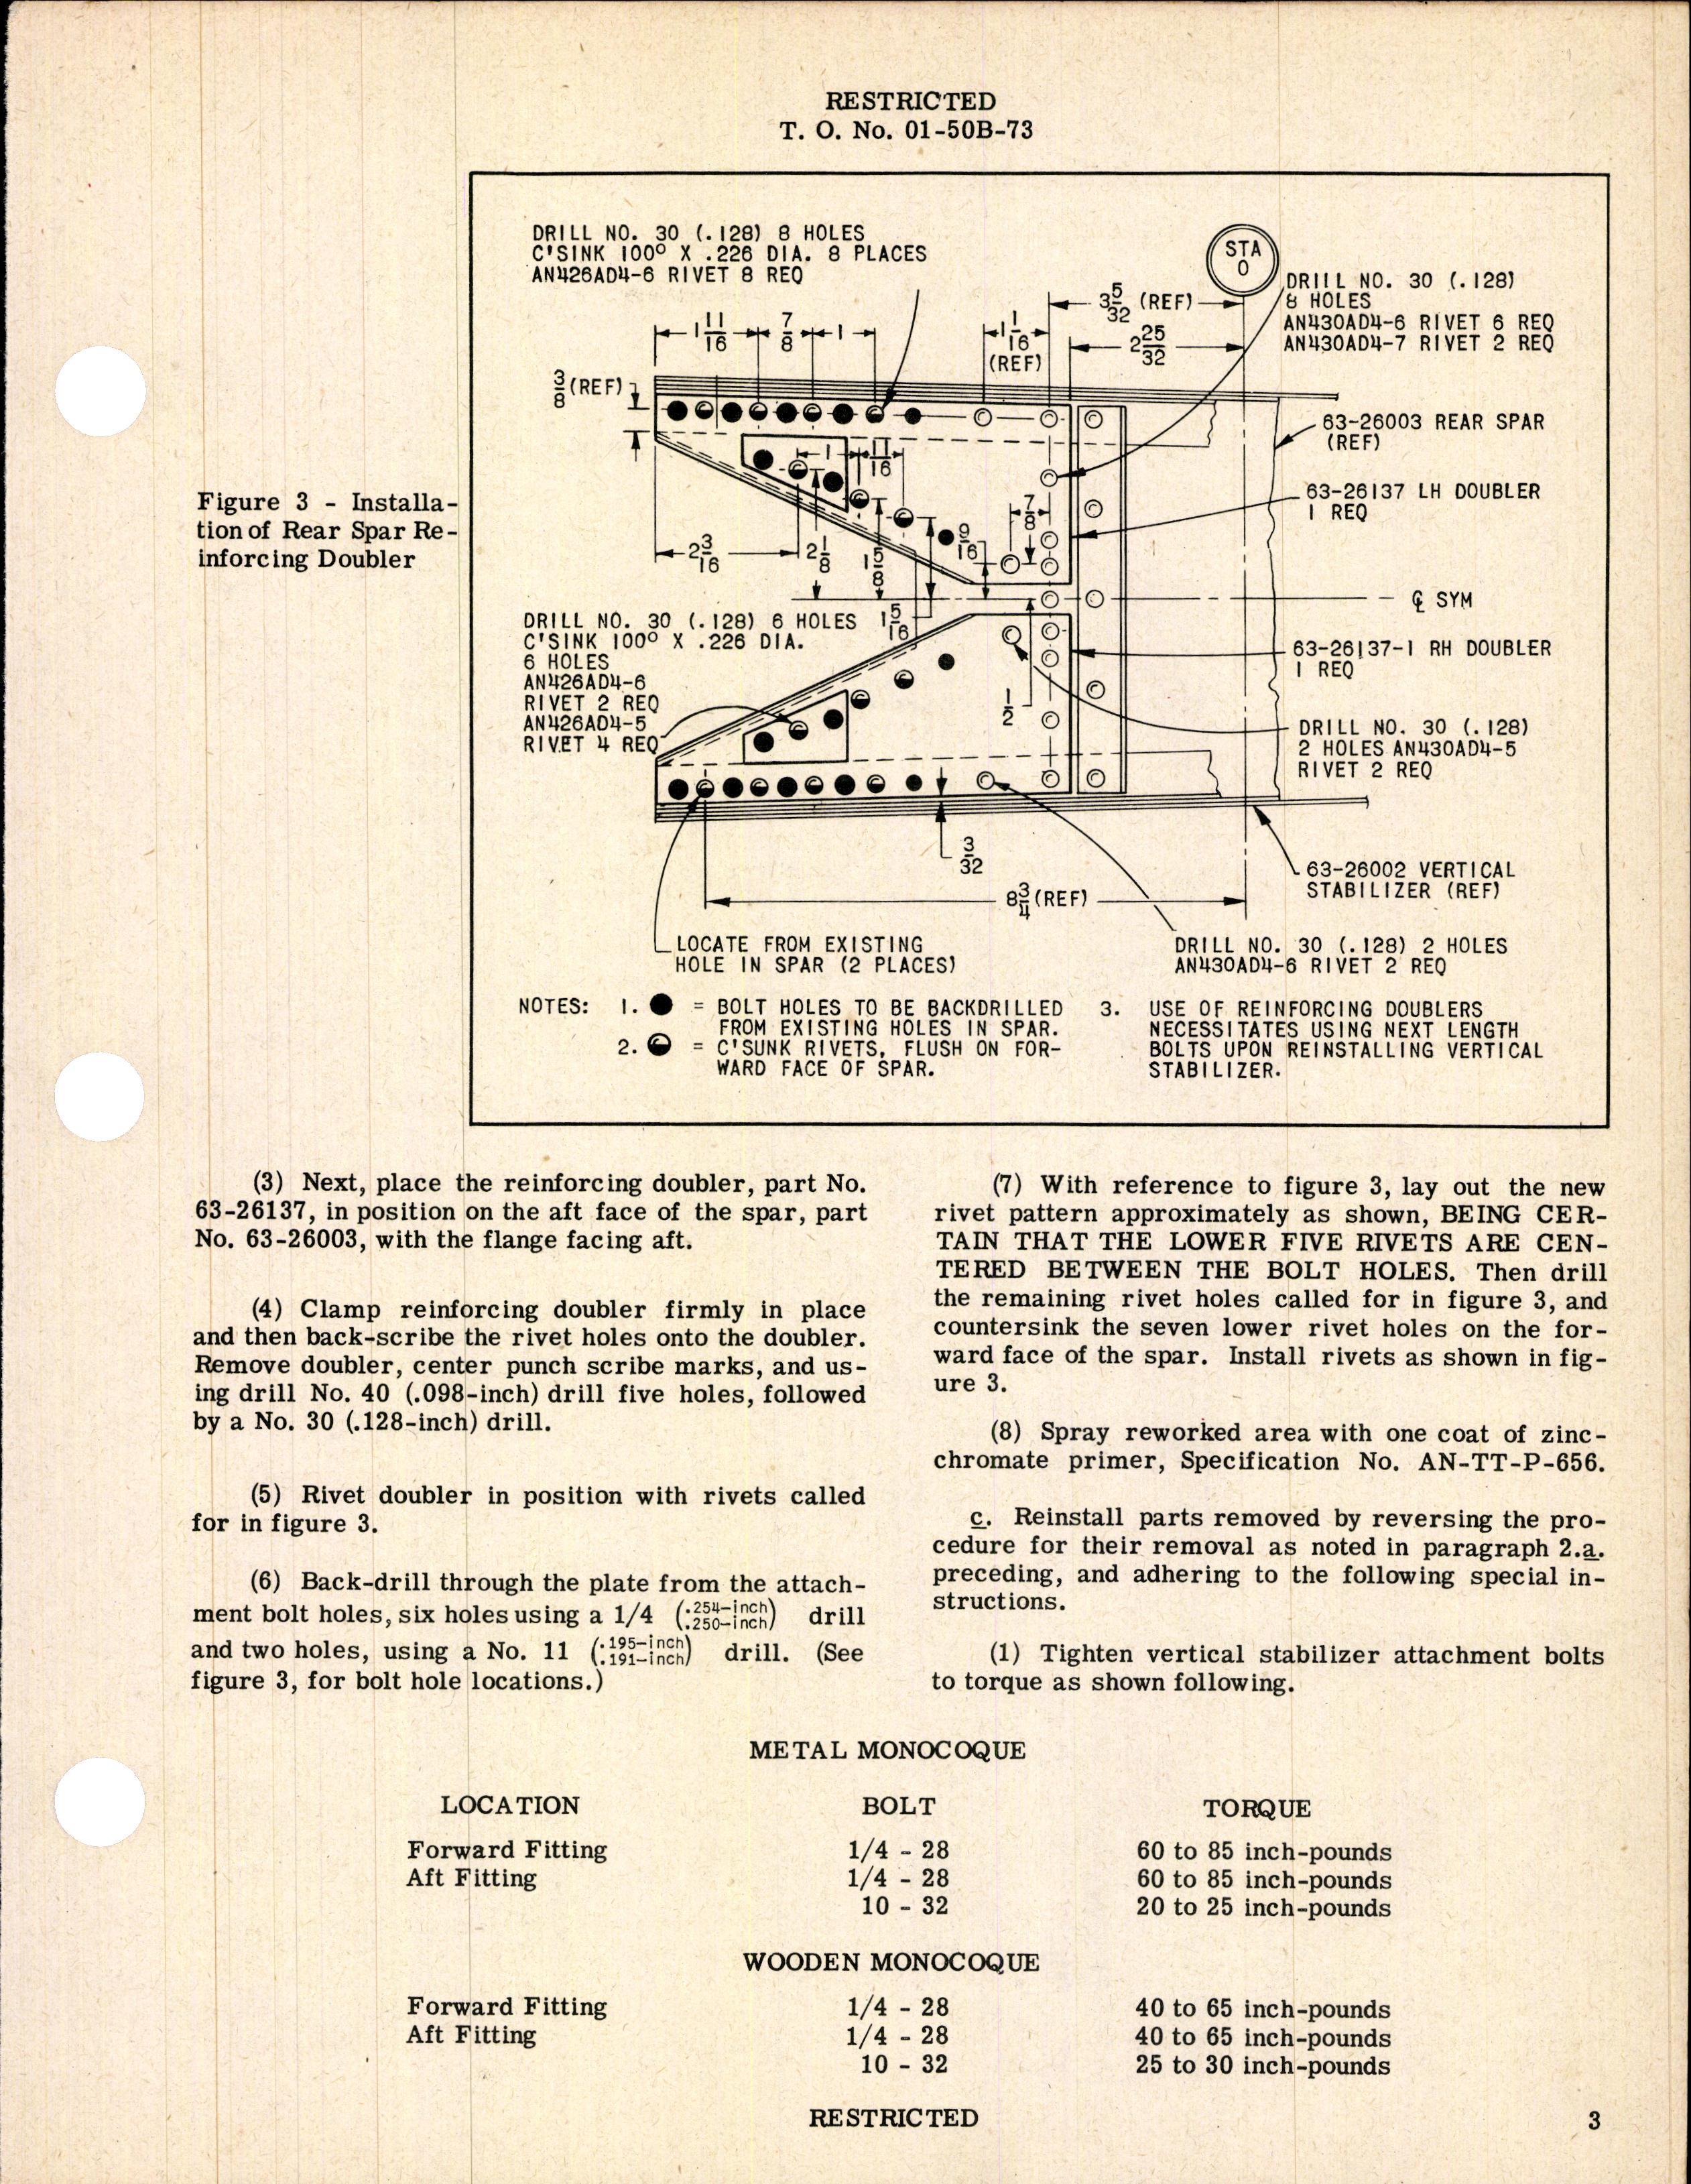 Sample page 3 from AirCorps Library document: Reinforcing the Vertical Stabilizer Rear Spar - BT-13, BT-13A, BT-15, and SNV-1